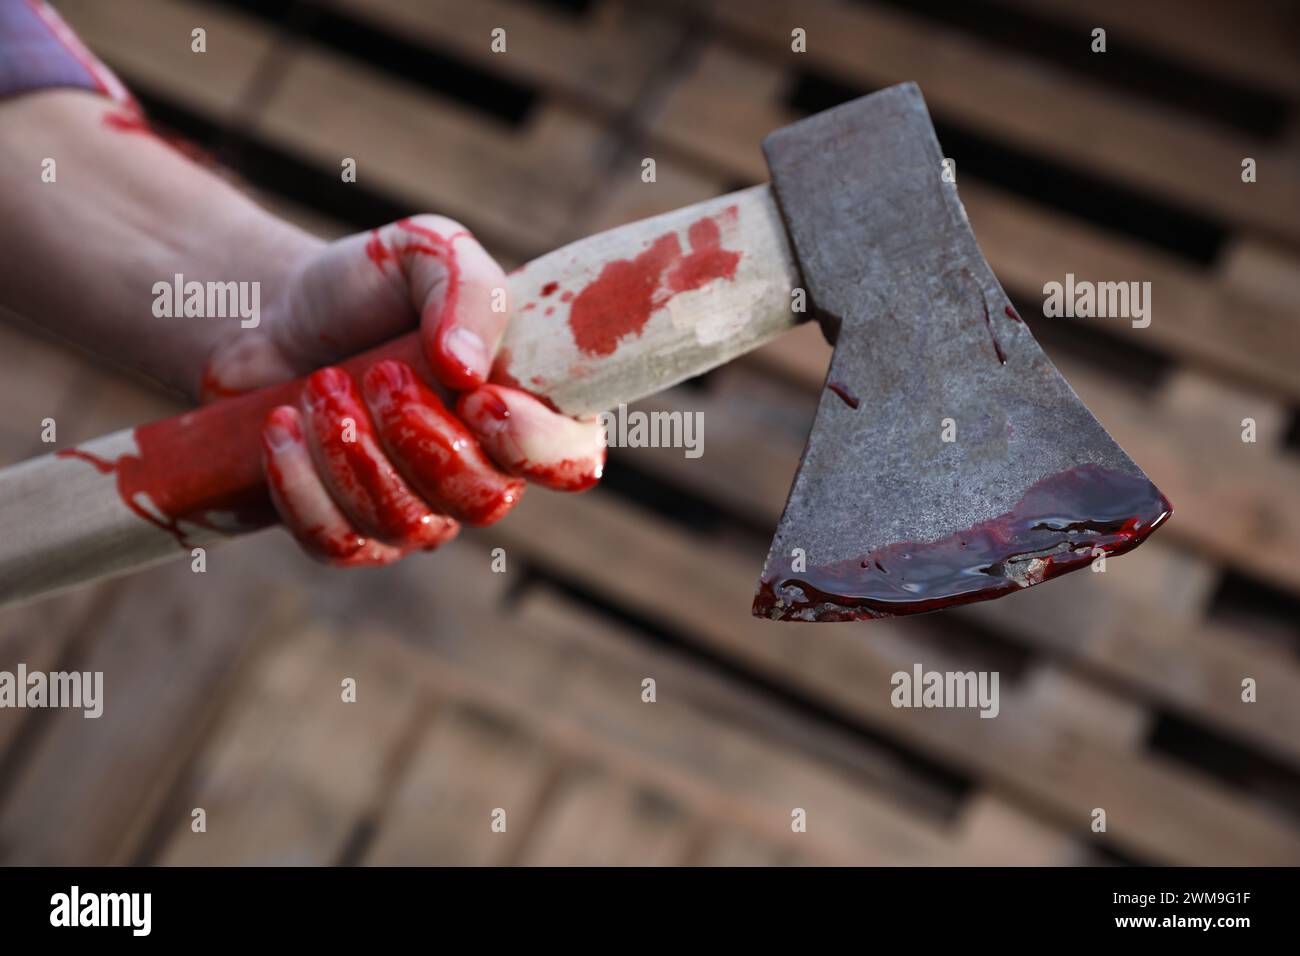 Man holding bloody axe outdoors, closeup view Stock Photo